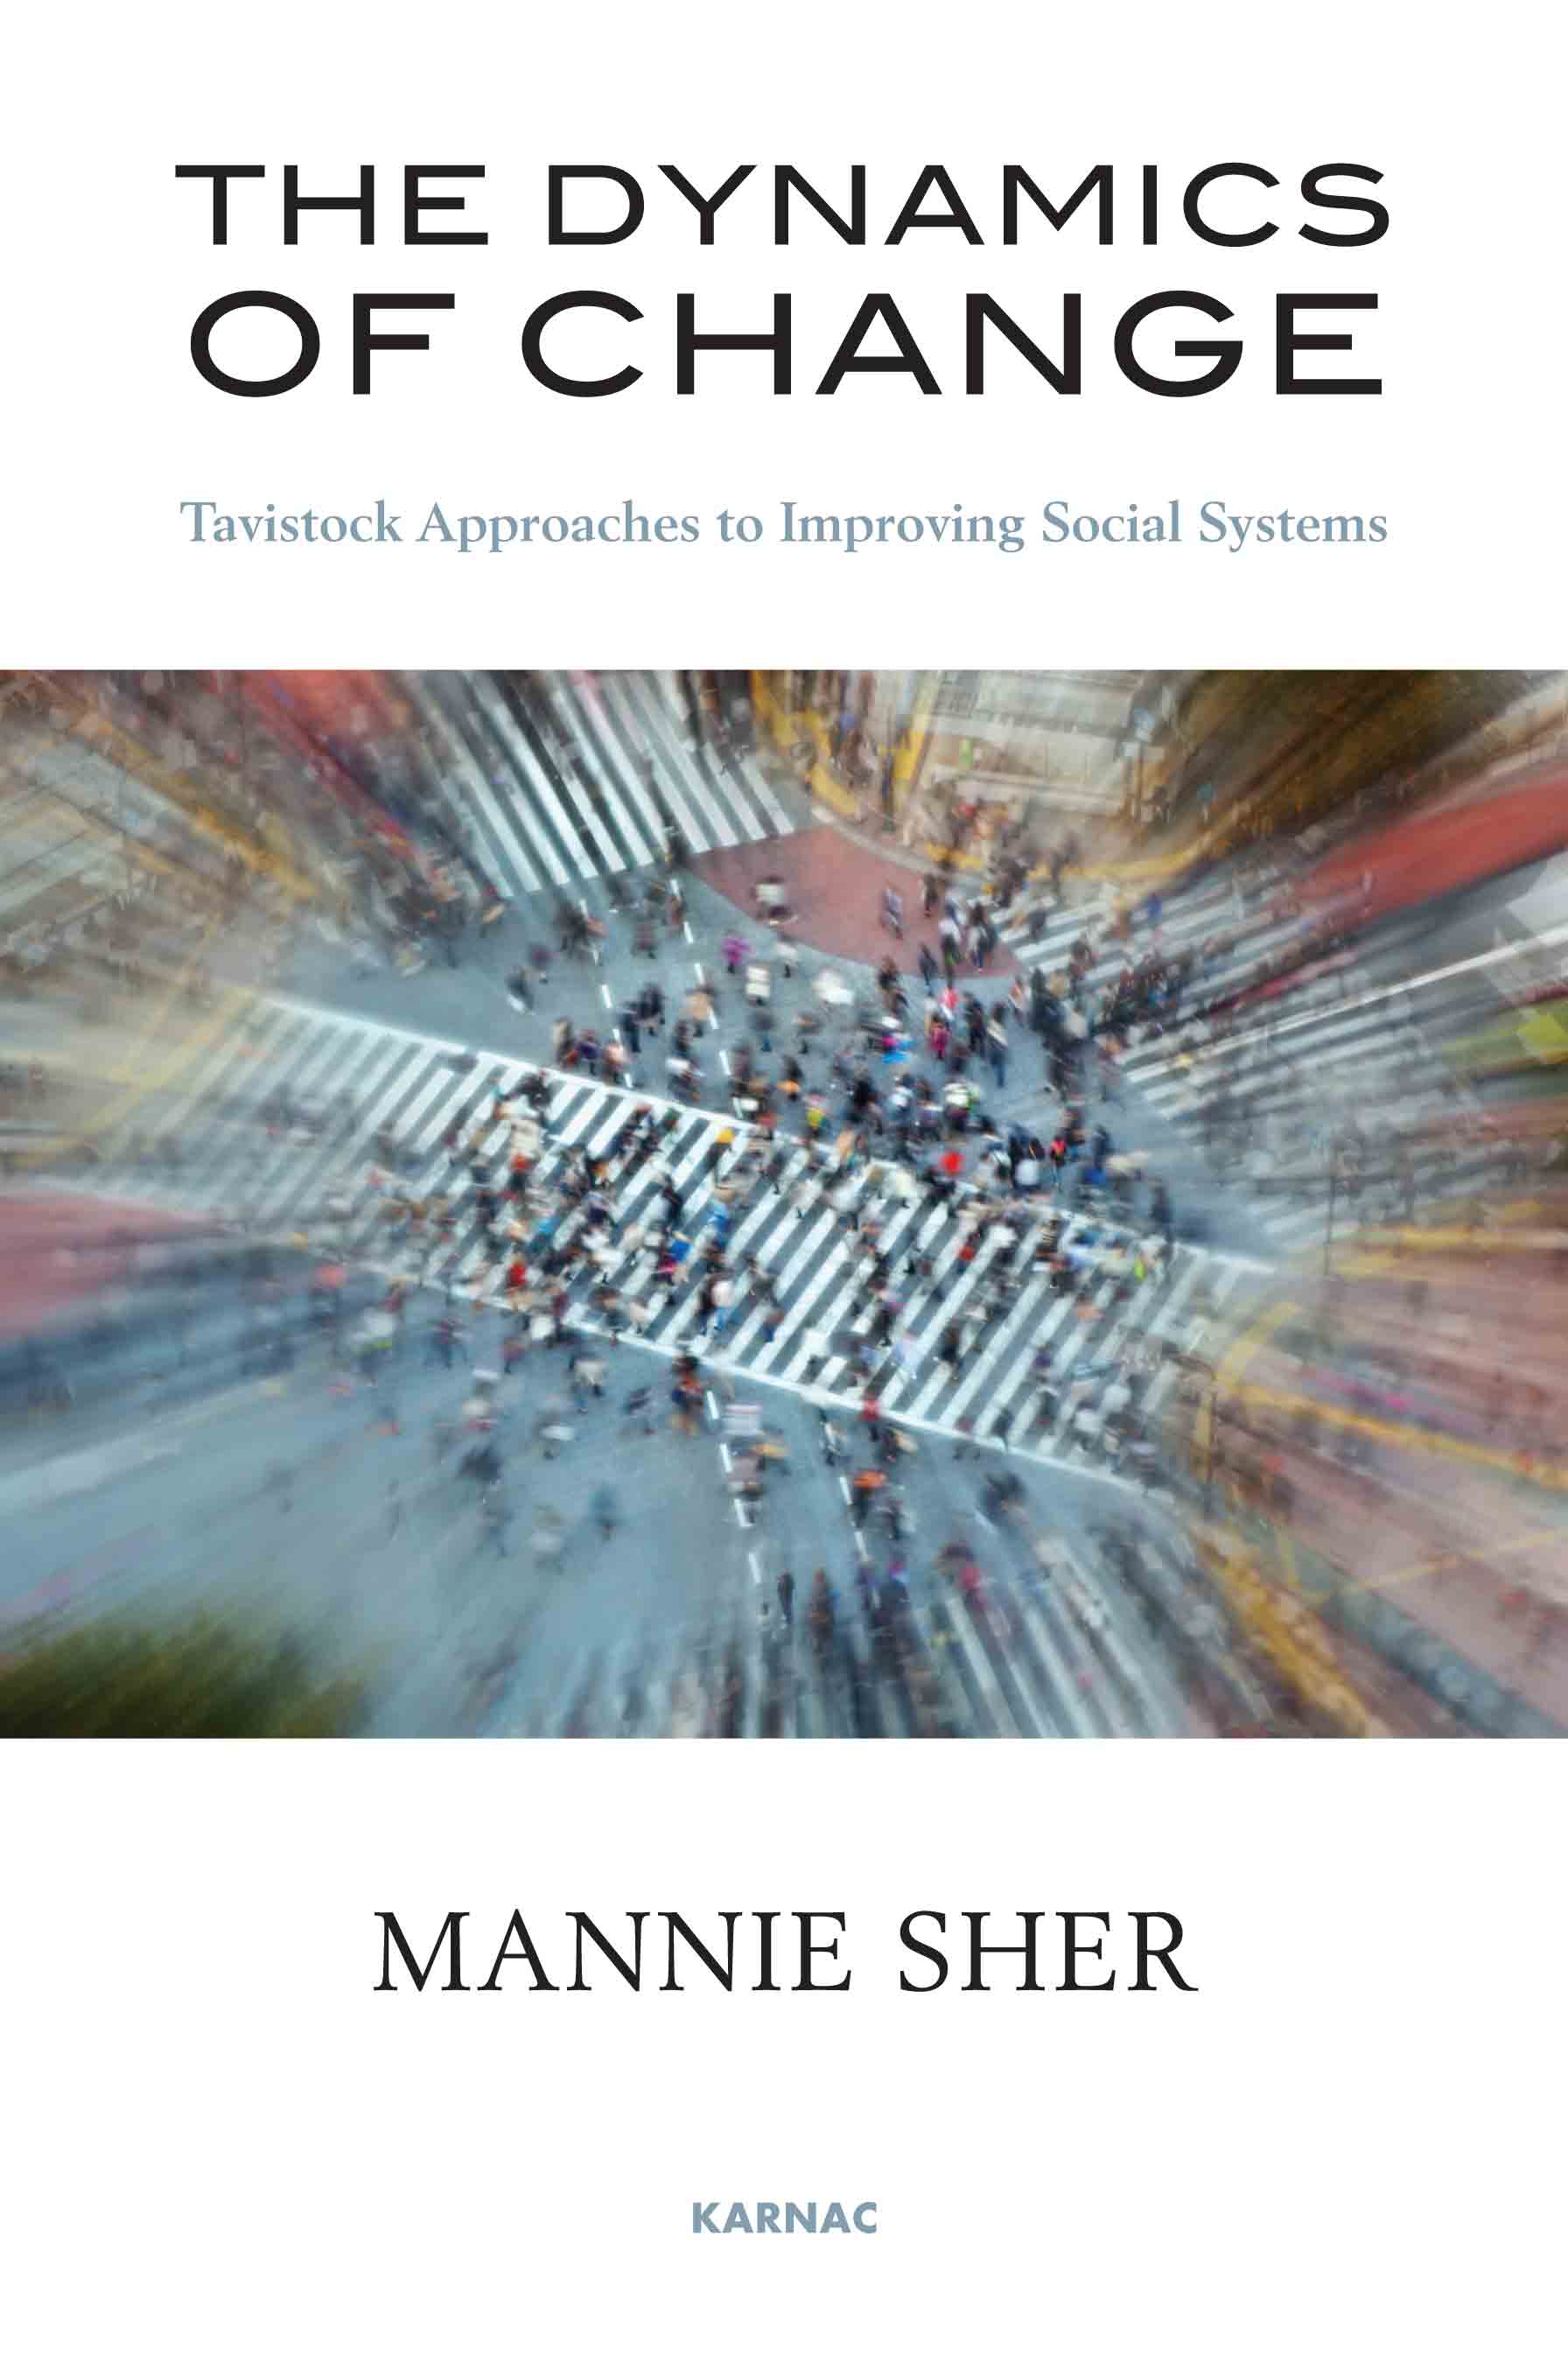 The Dynamics of Change: Tavistock Approaches to Improving Social Systems